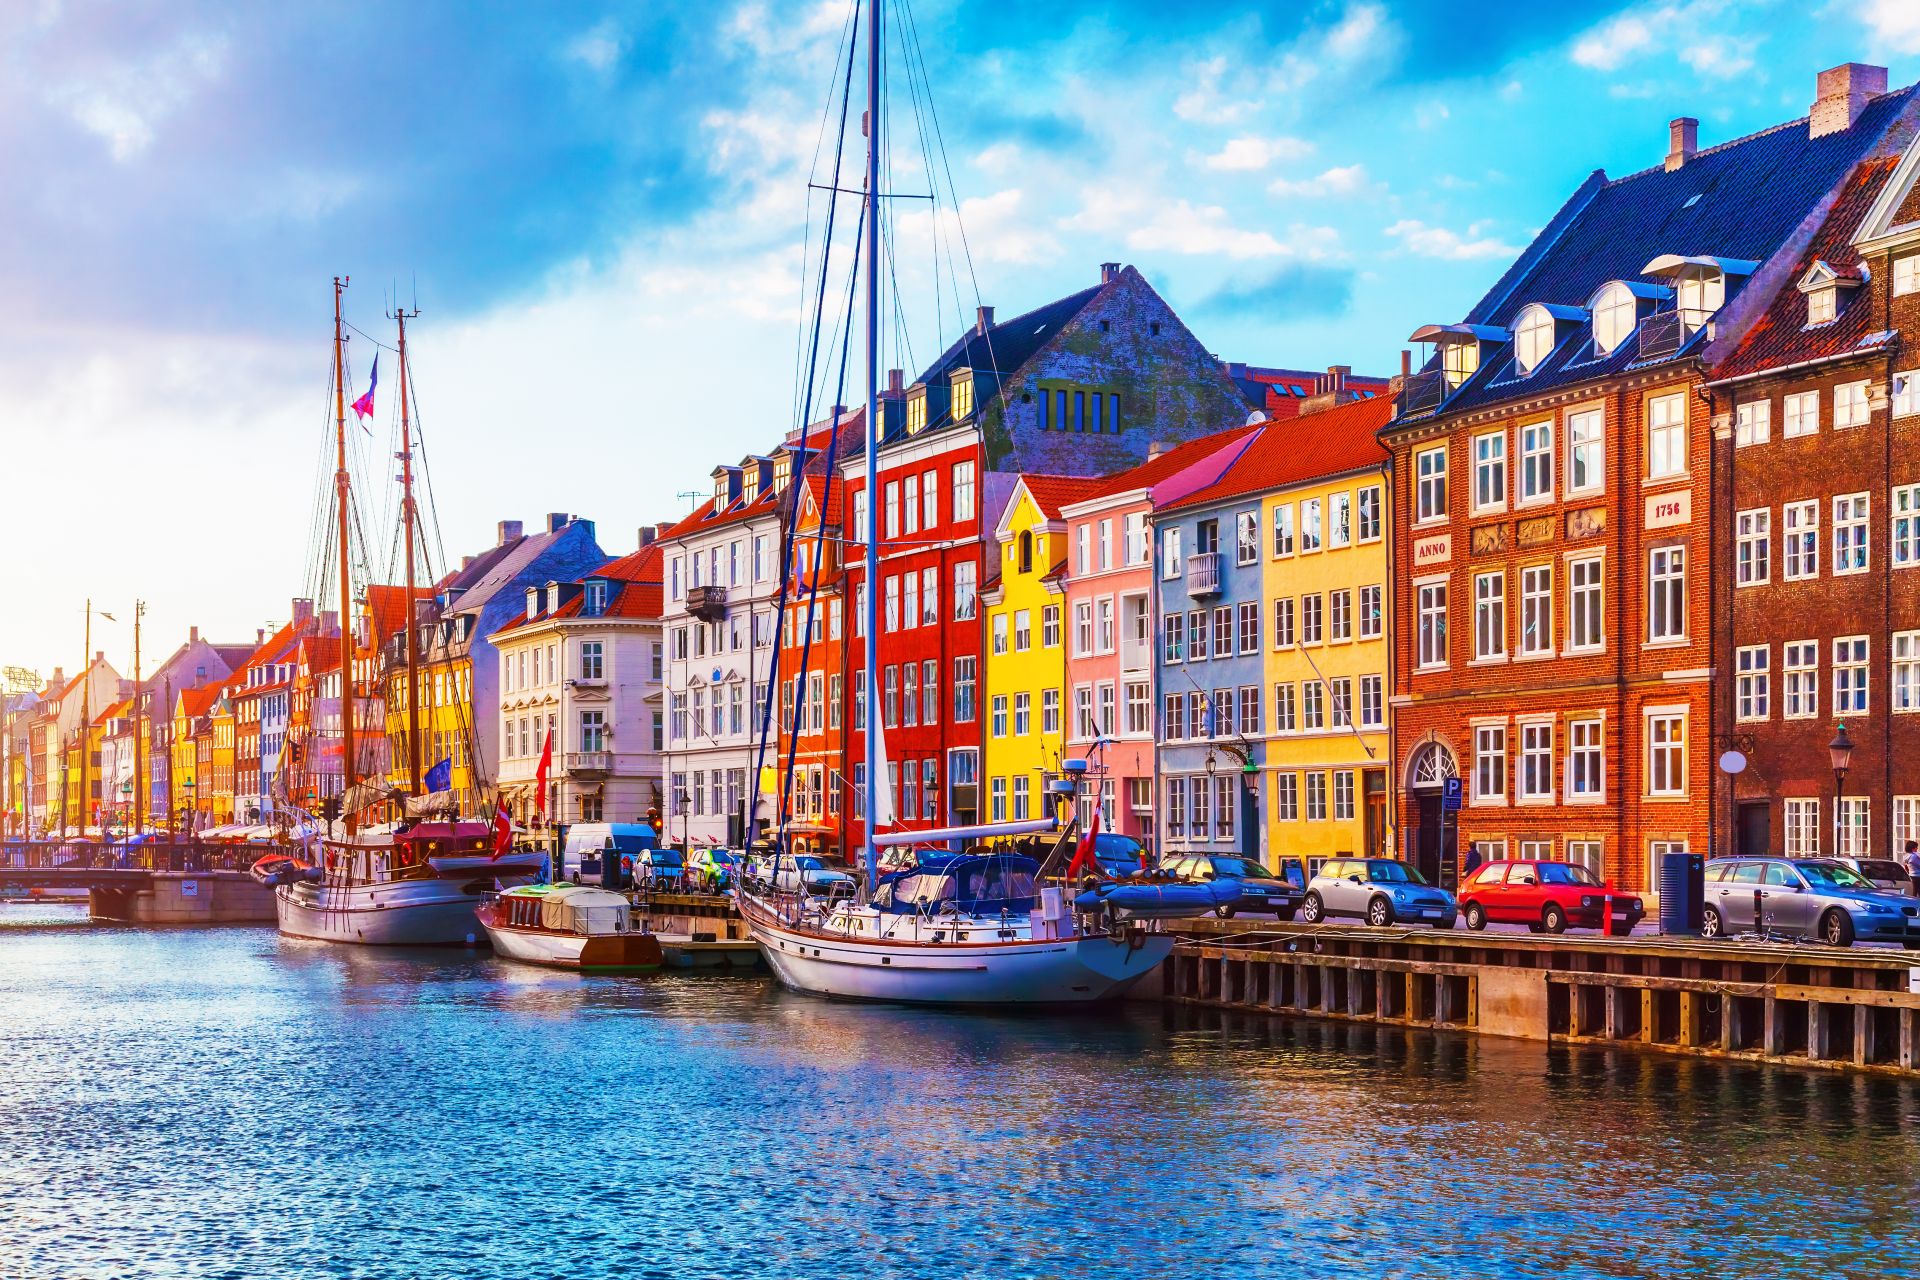 Nyhavn quay with colored buildings